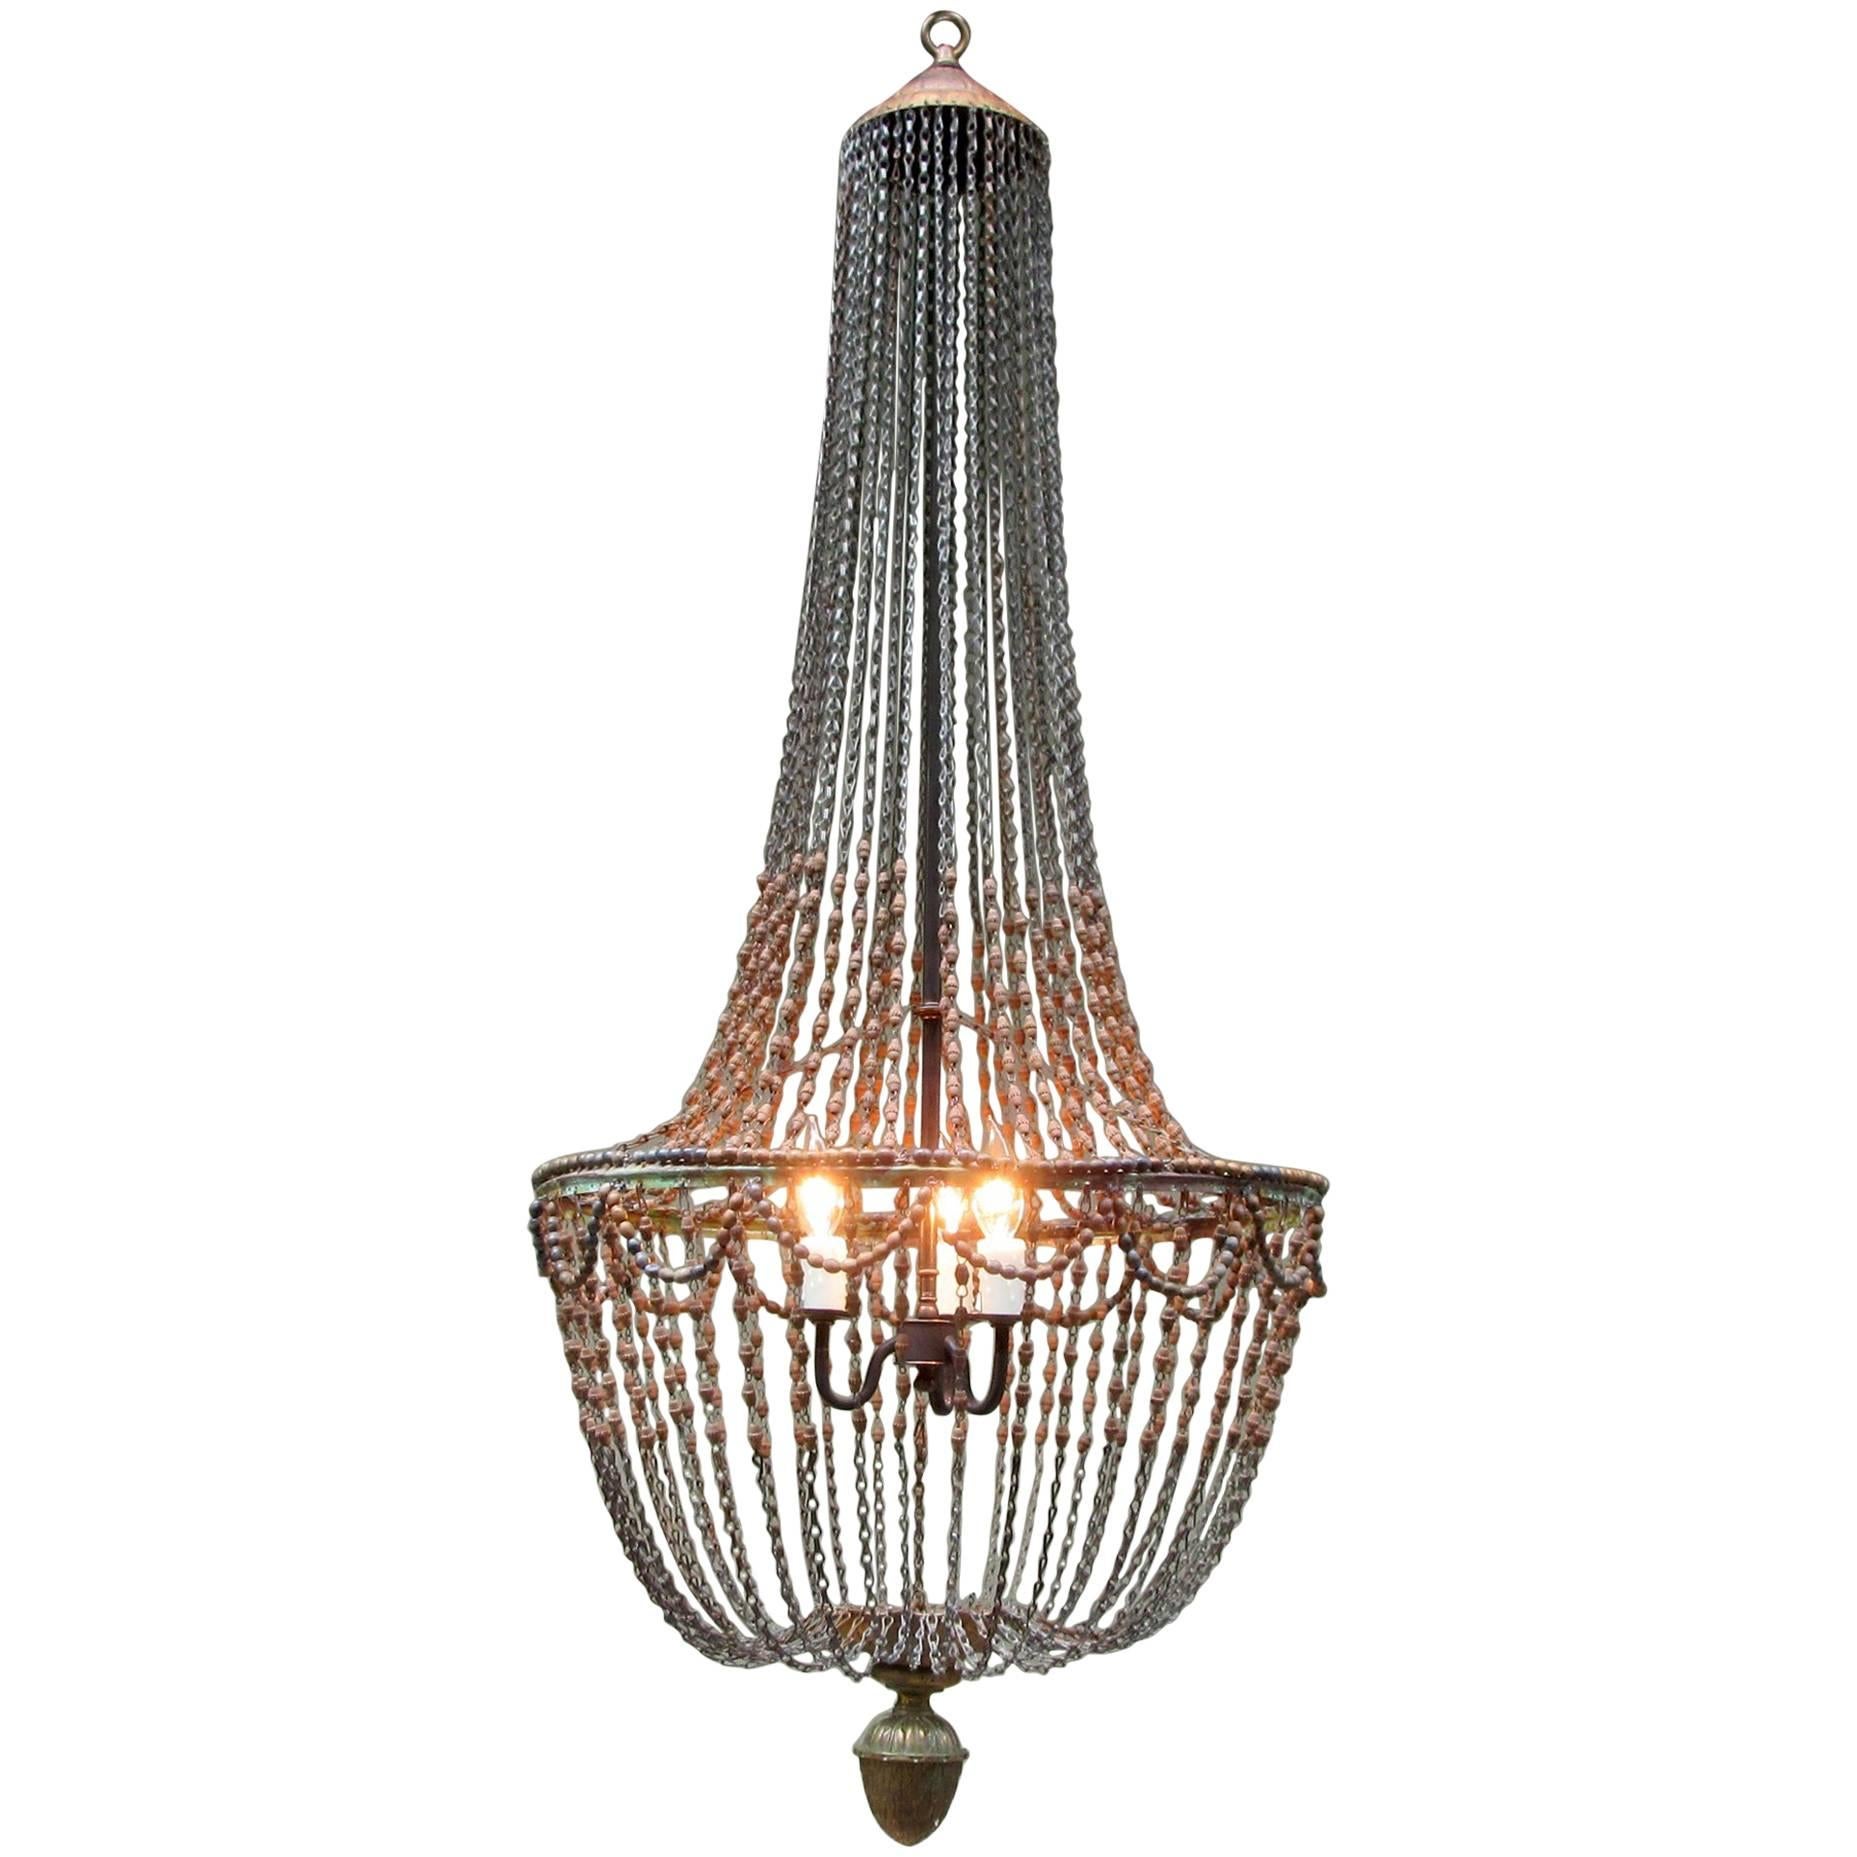 Early 20th Century Italian Empire Hand-Carved Wood Bead Chandelier with Pinecone